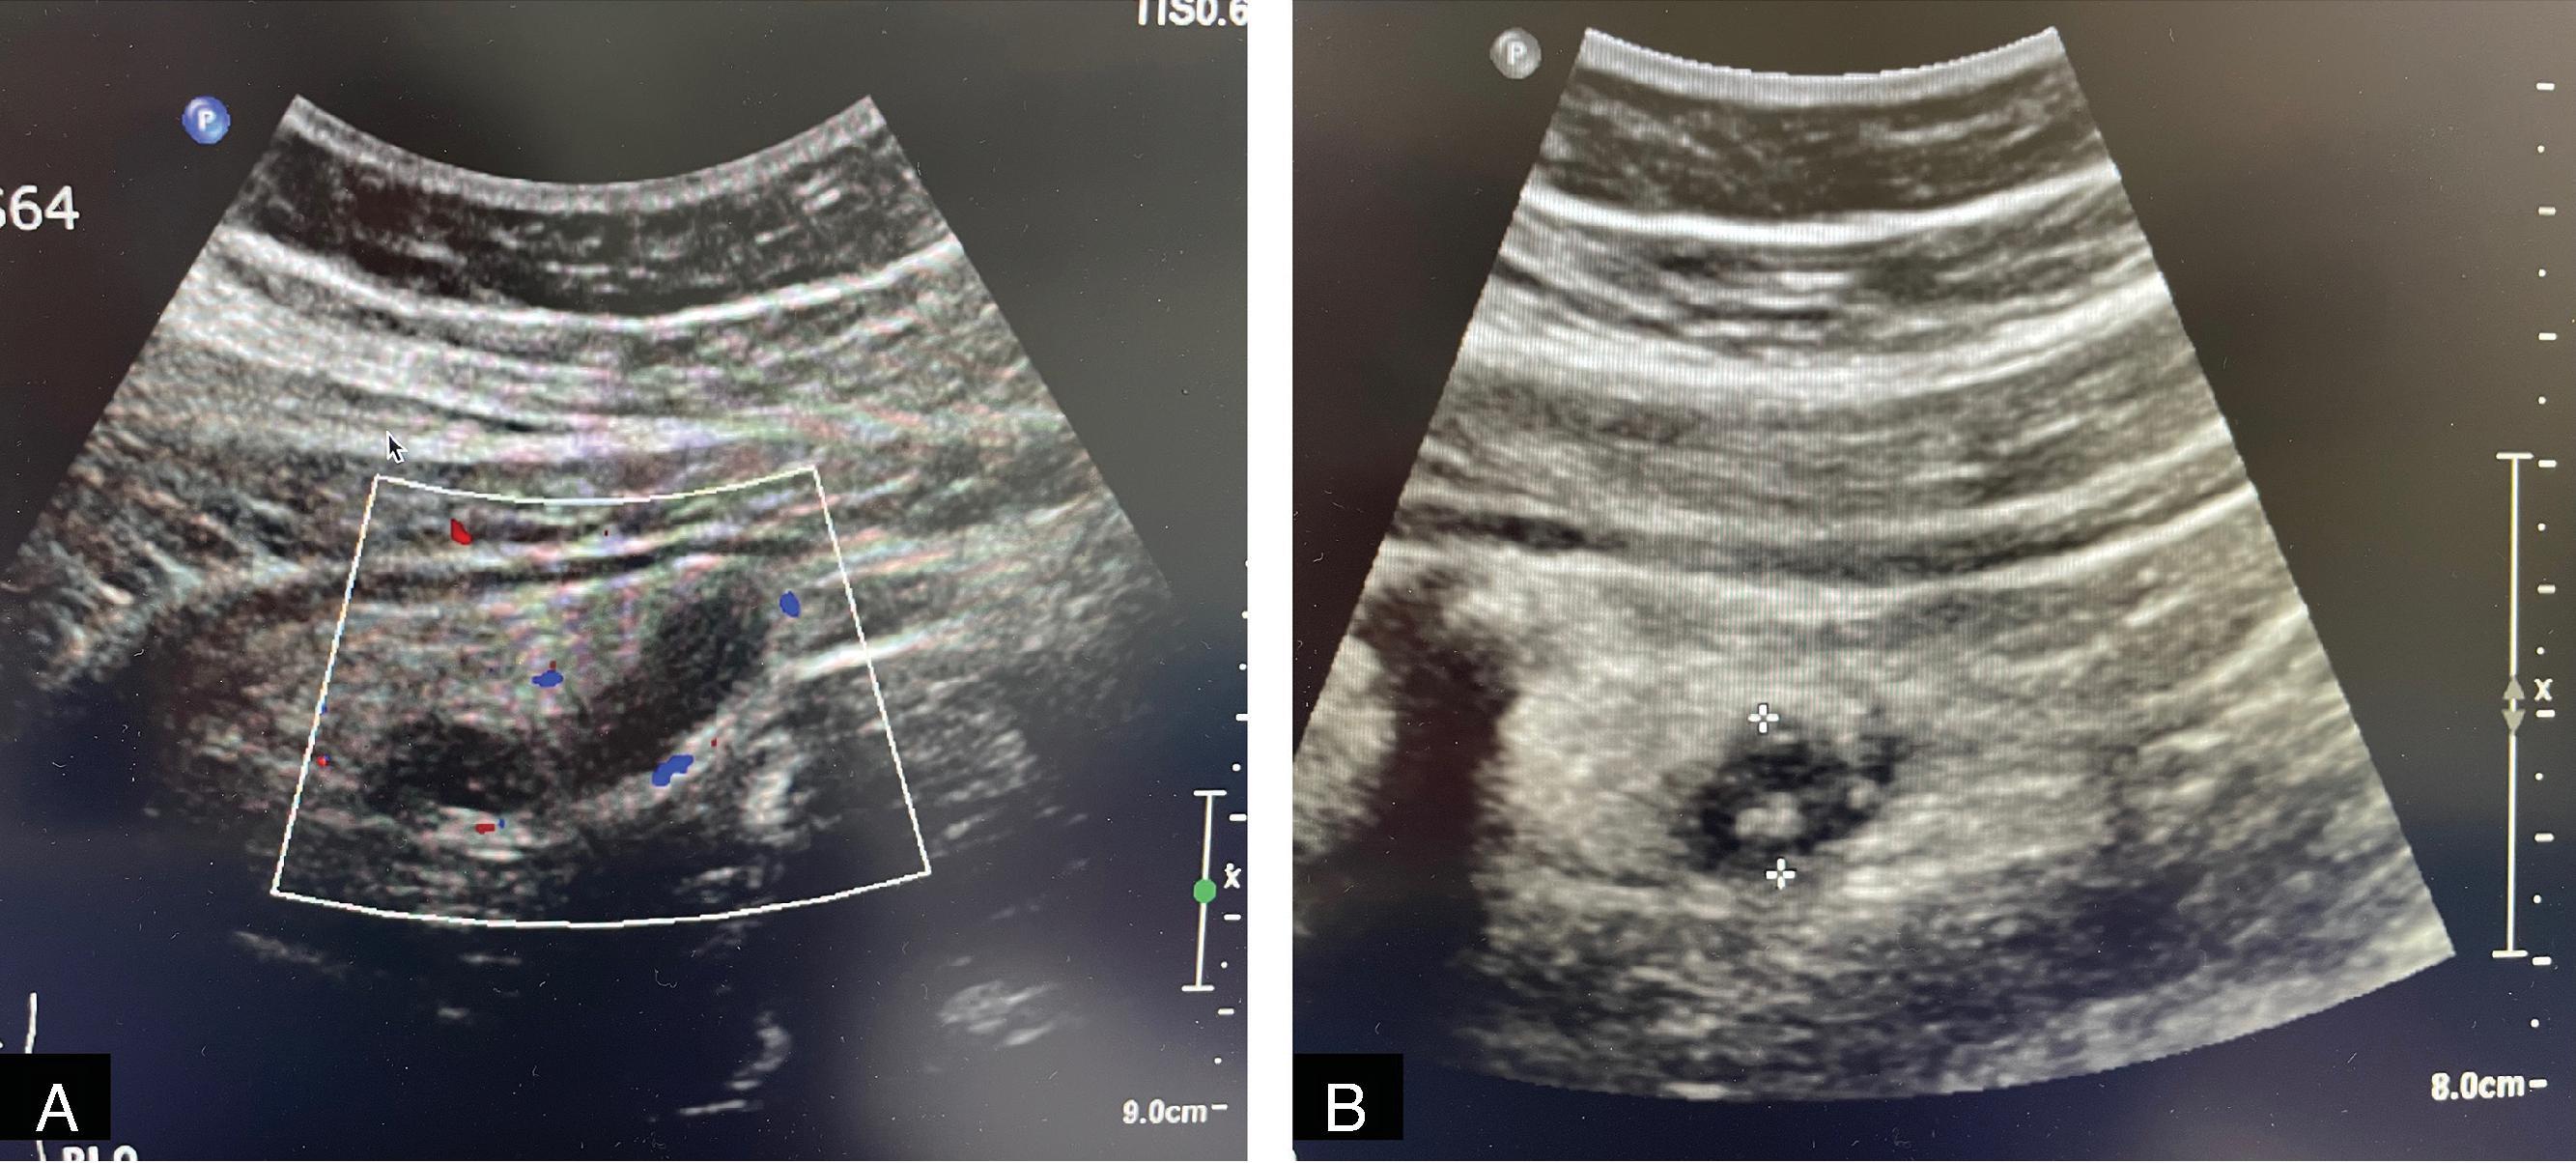 FIG. 1, Selected right lower quadrant ultrasound images in a 10-year-old boy with abdominal pain shows a dilated fluid-filled tubular structure in increased vascularity (A) and an echogenic focus consistent with an appendicolith (B) . These findings are consistent with acute appendicitis.